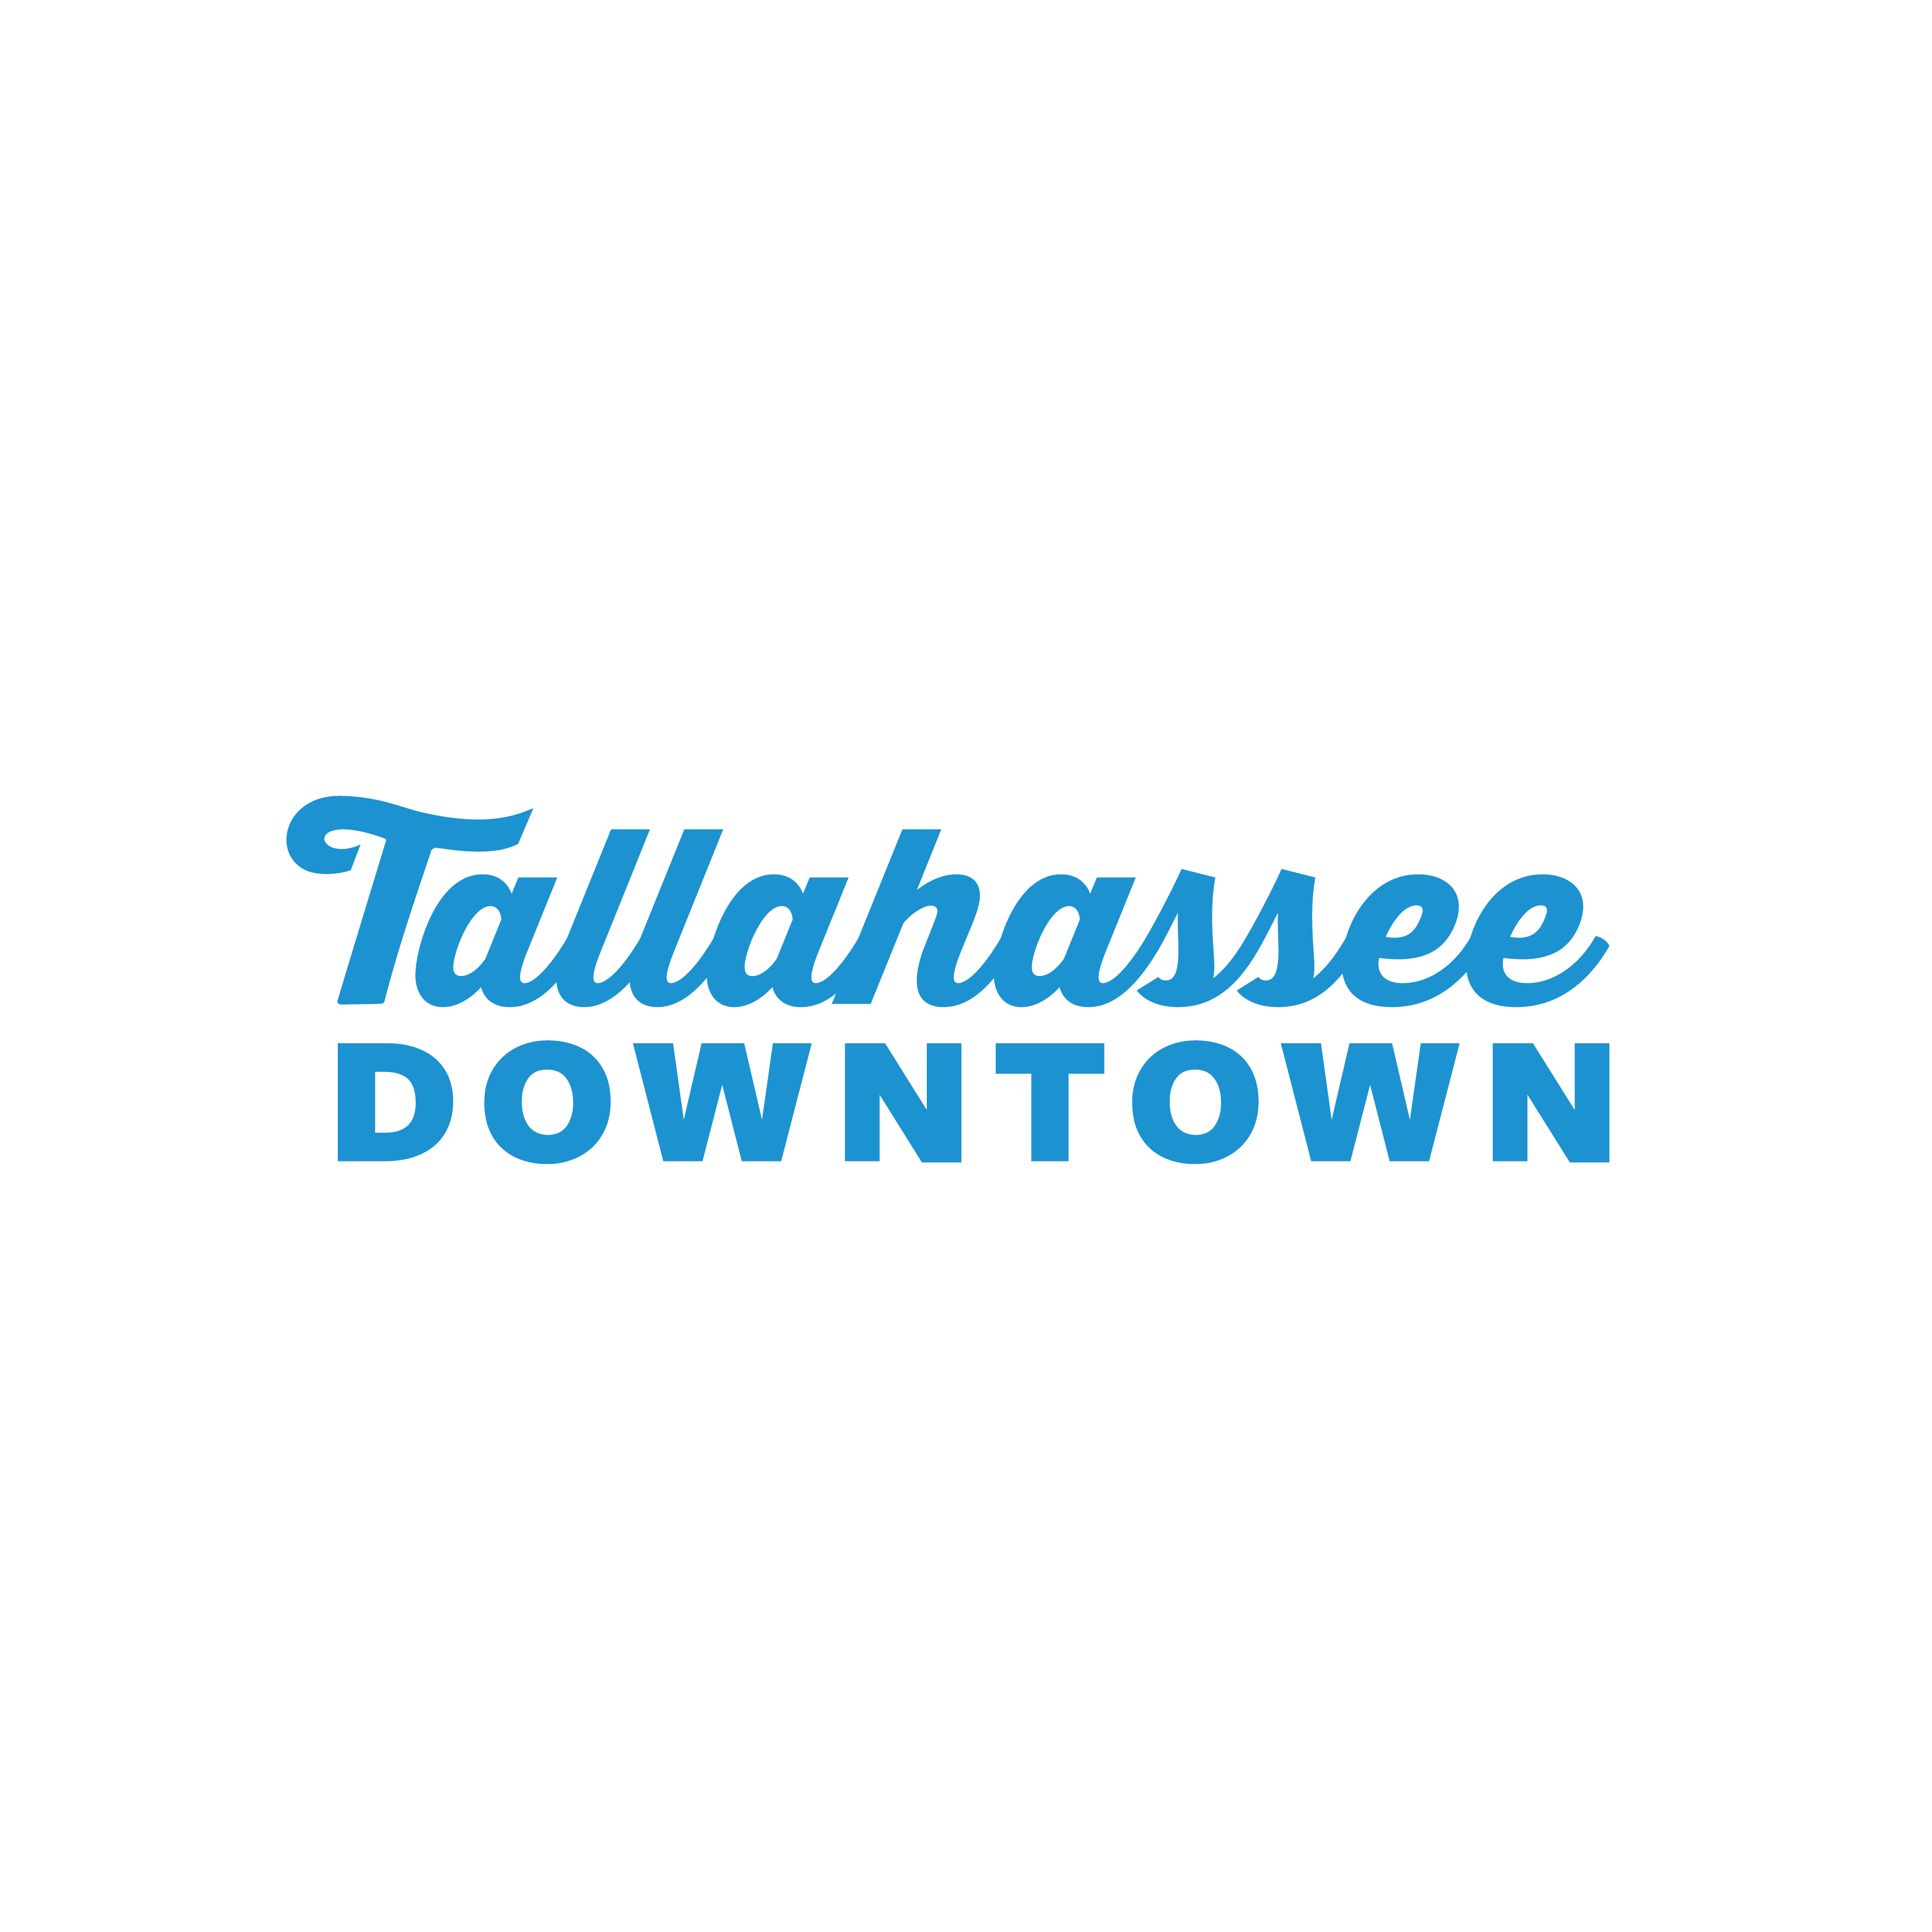 Tallahassee Downtown Blue Primary Logo